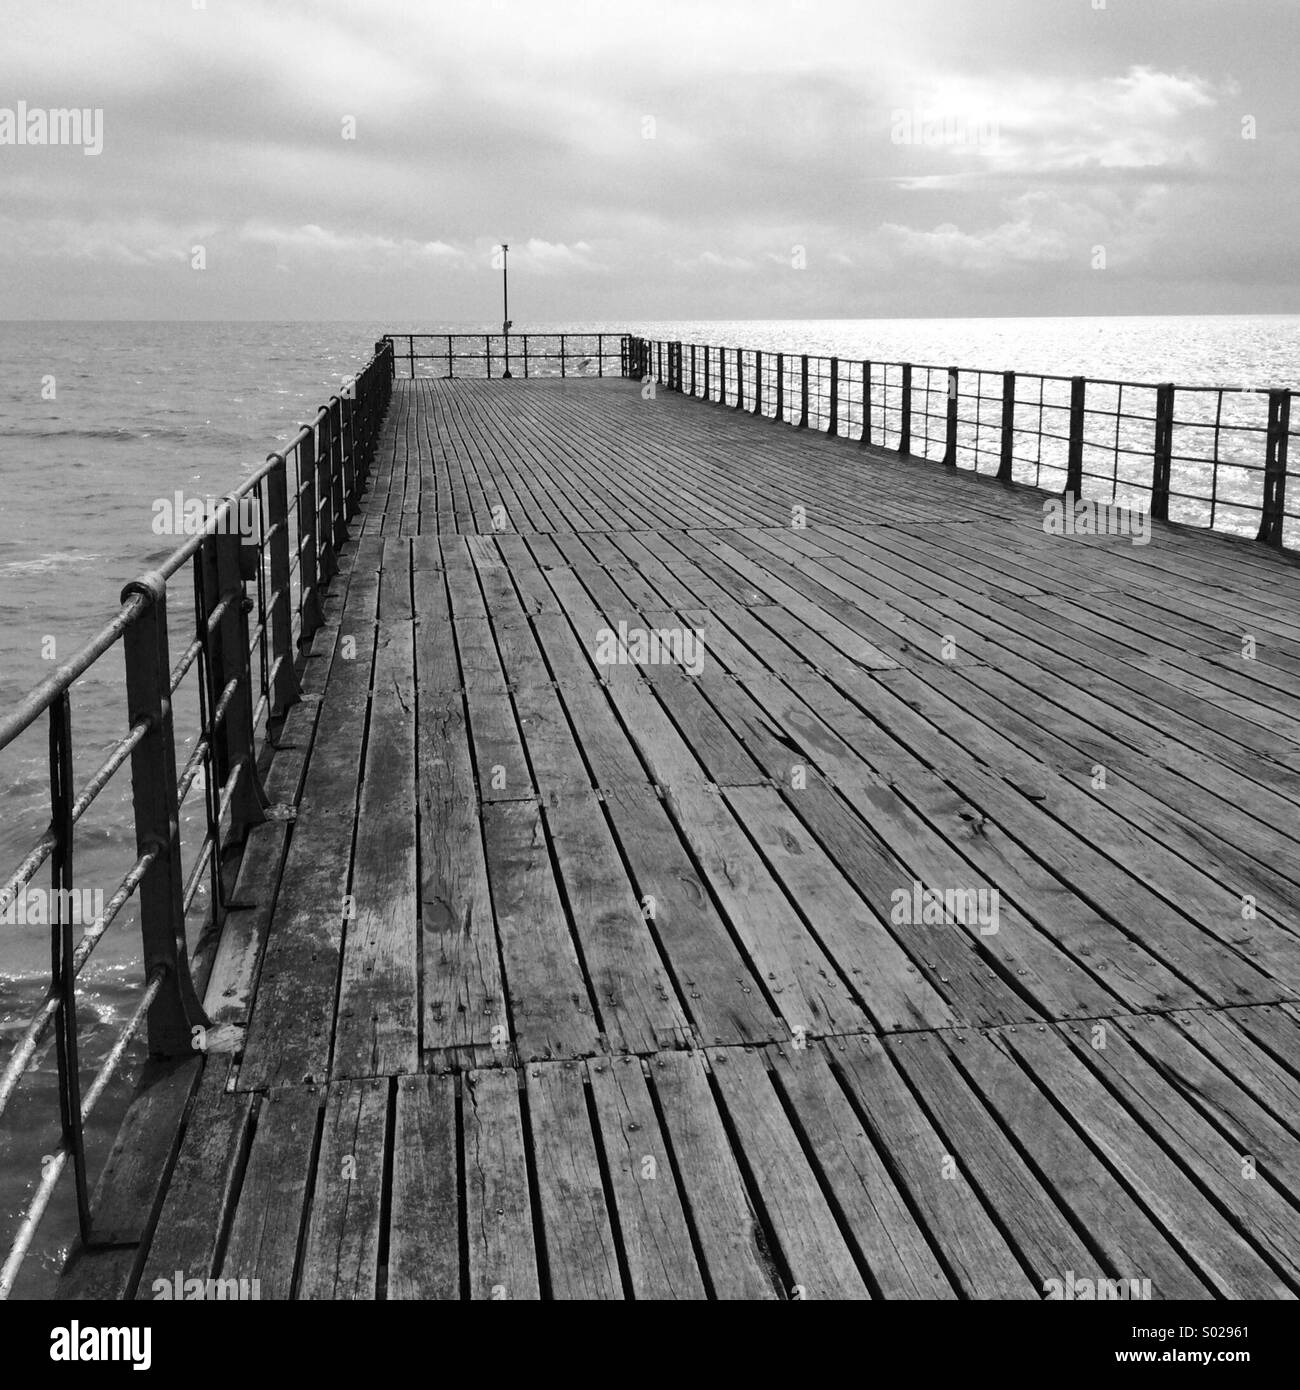 Boardwalk railings Black and White Stock Photos & Images - Alamy